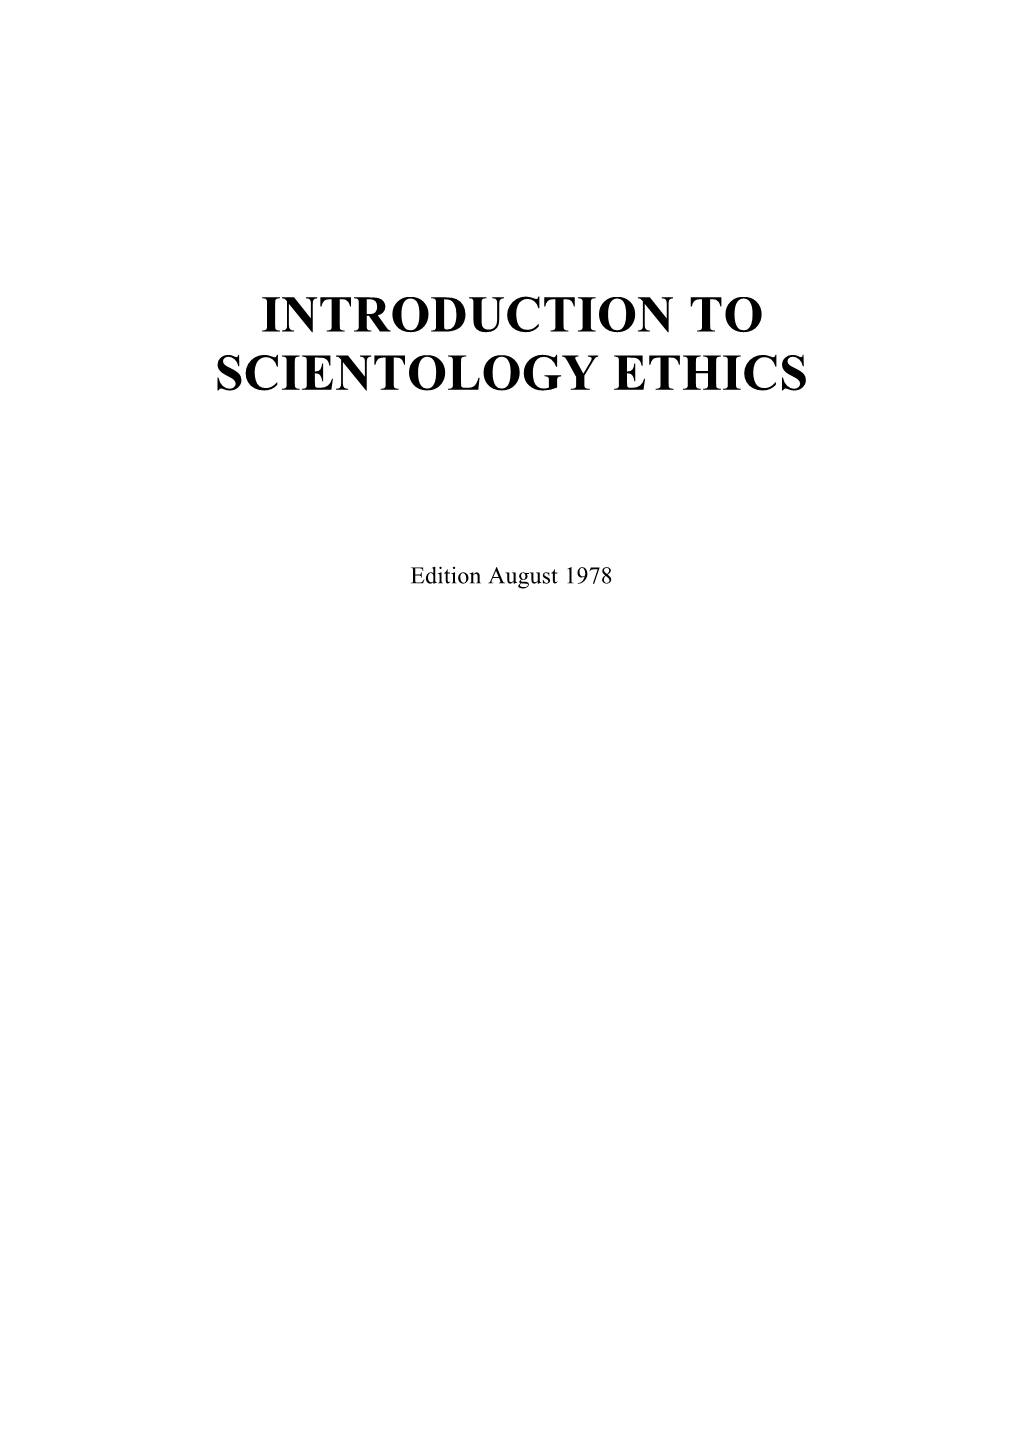 Introduction to Scientology Ethics.Pdf